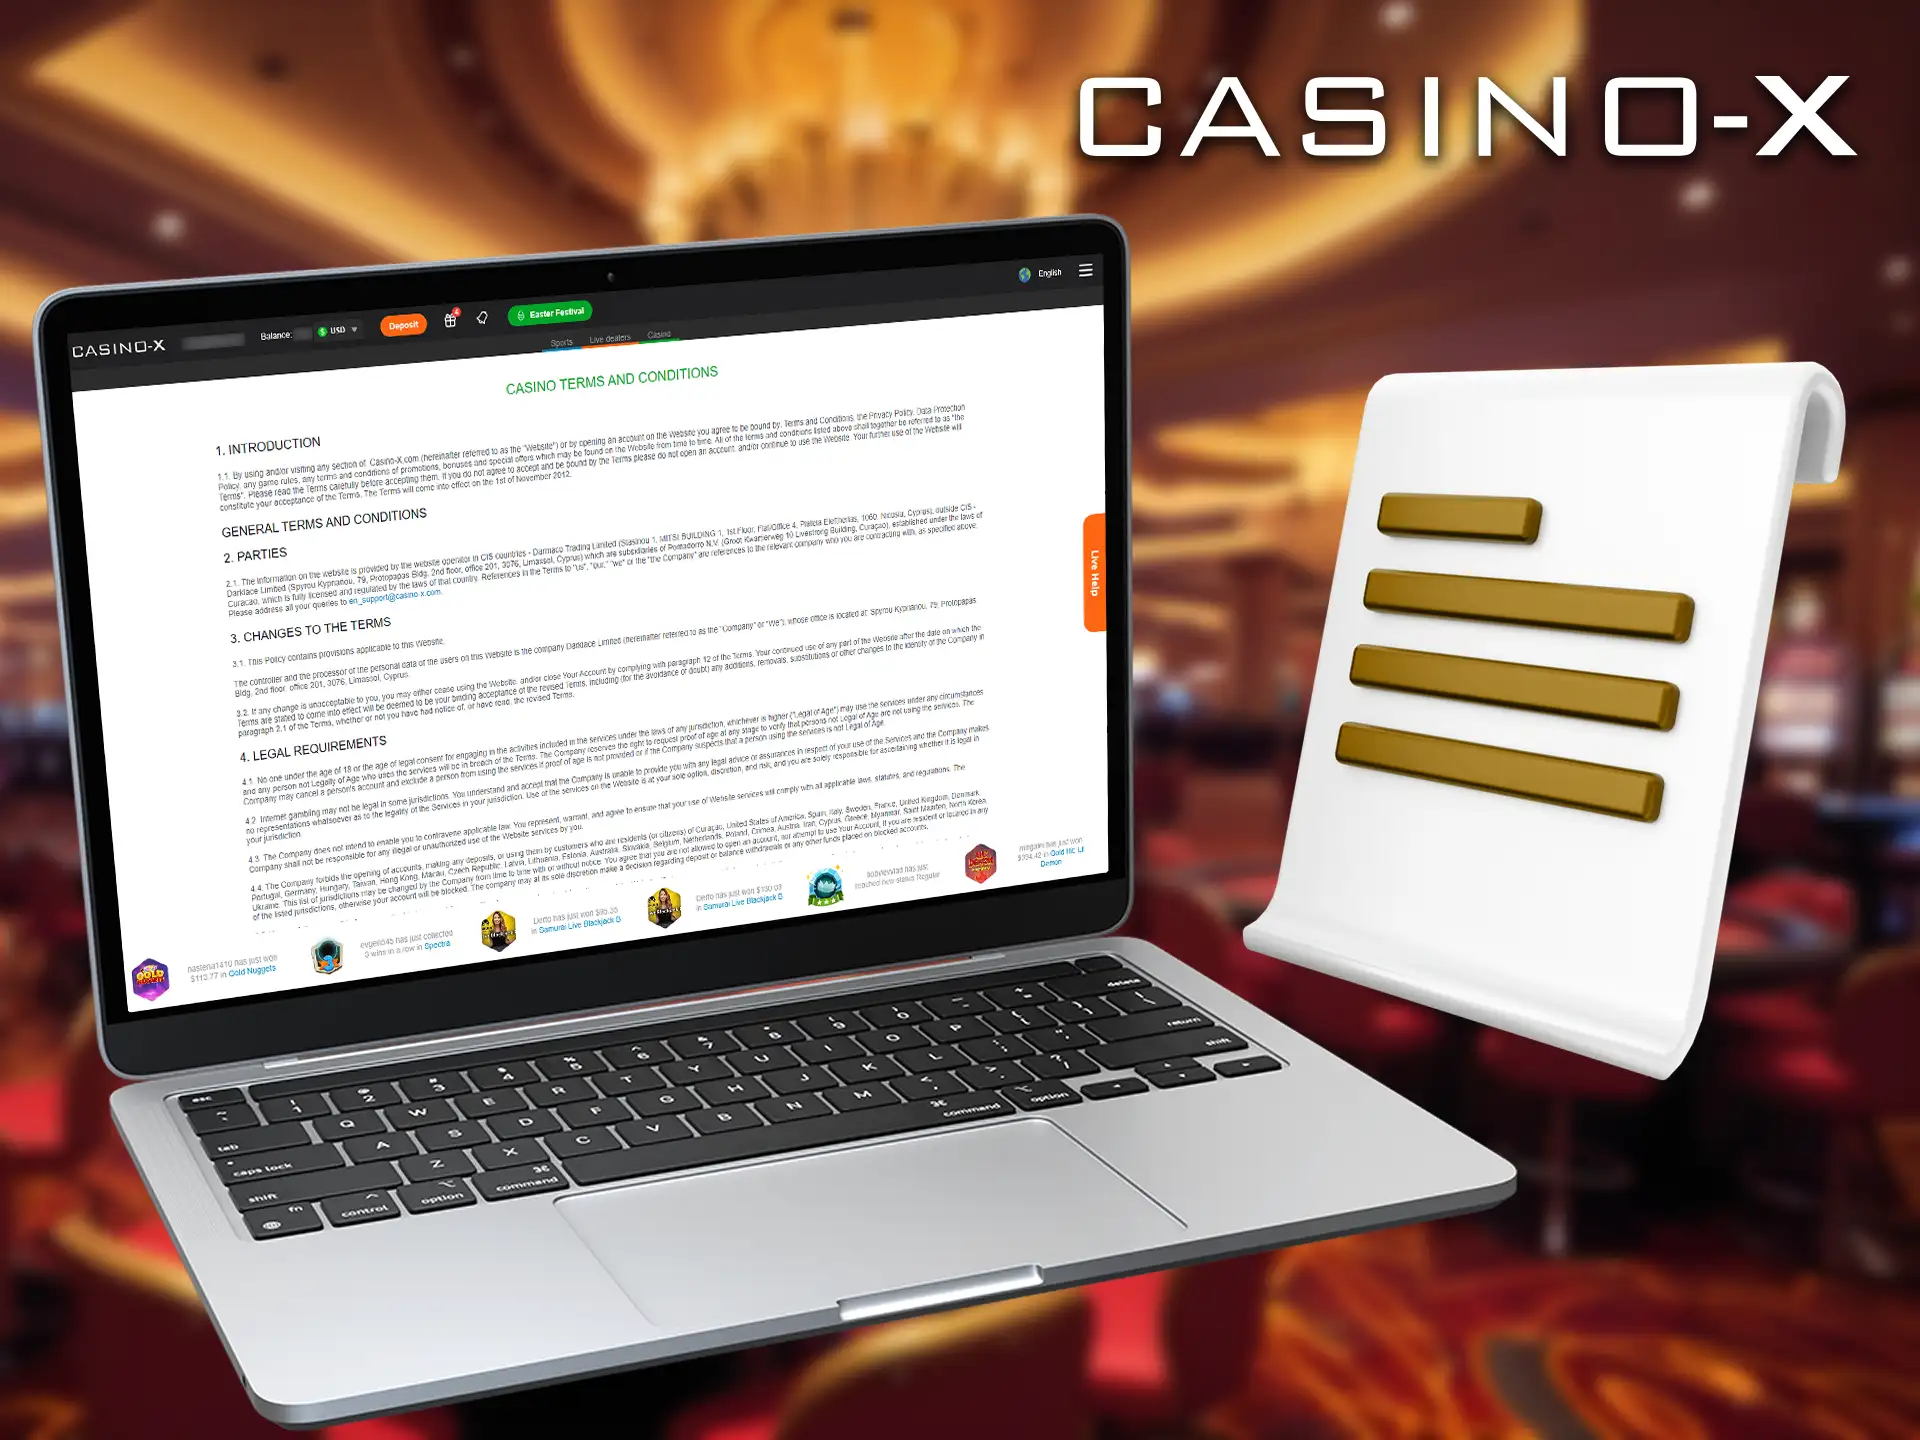 At Casino-X, we are committed to responsible gaming and adhering to all applicable regulations.